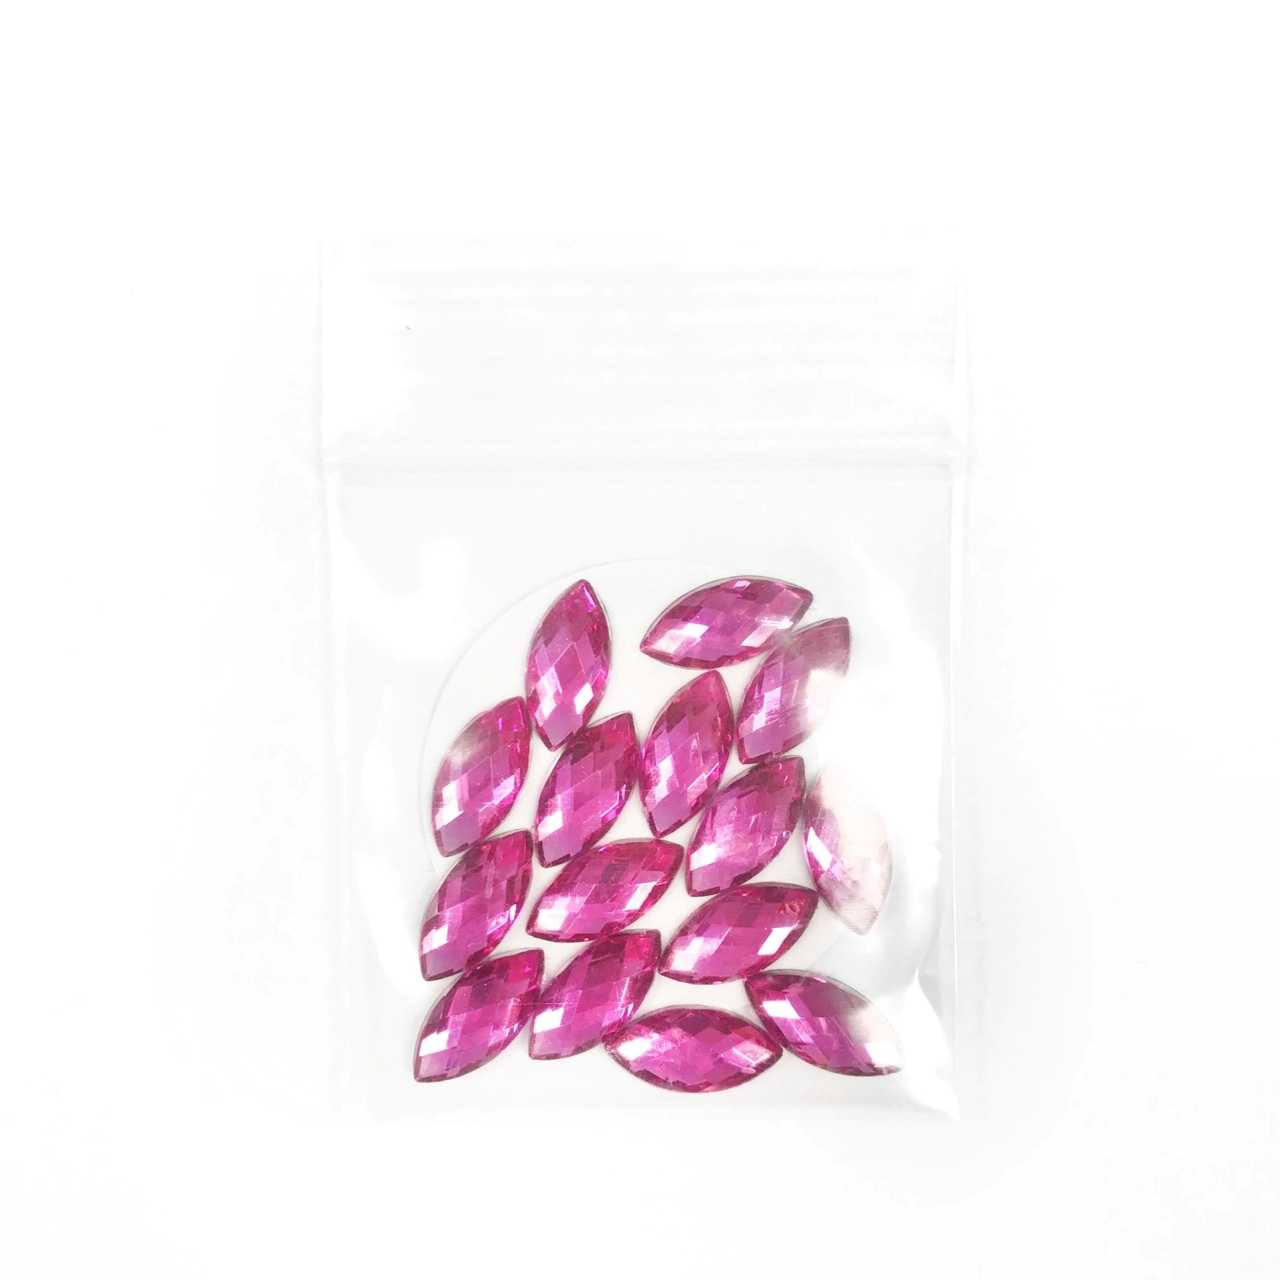 Picture of Pointed Eye Gems - Magenta - 7x15mm (15 pc) (SG-PE2)